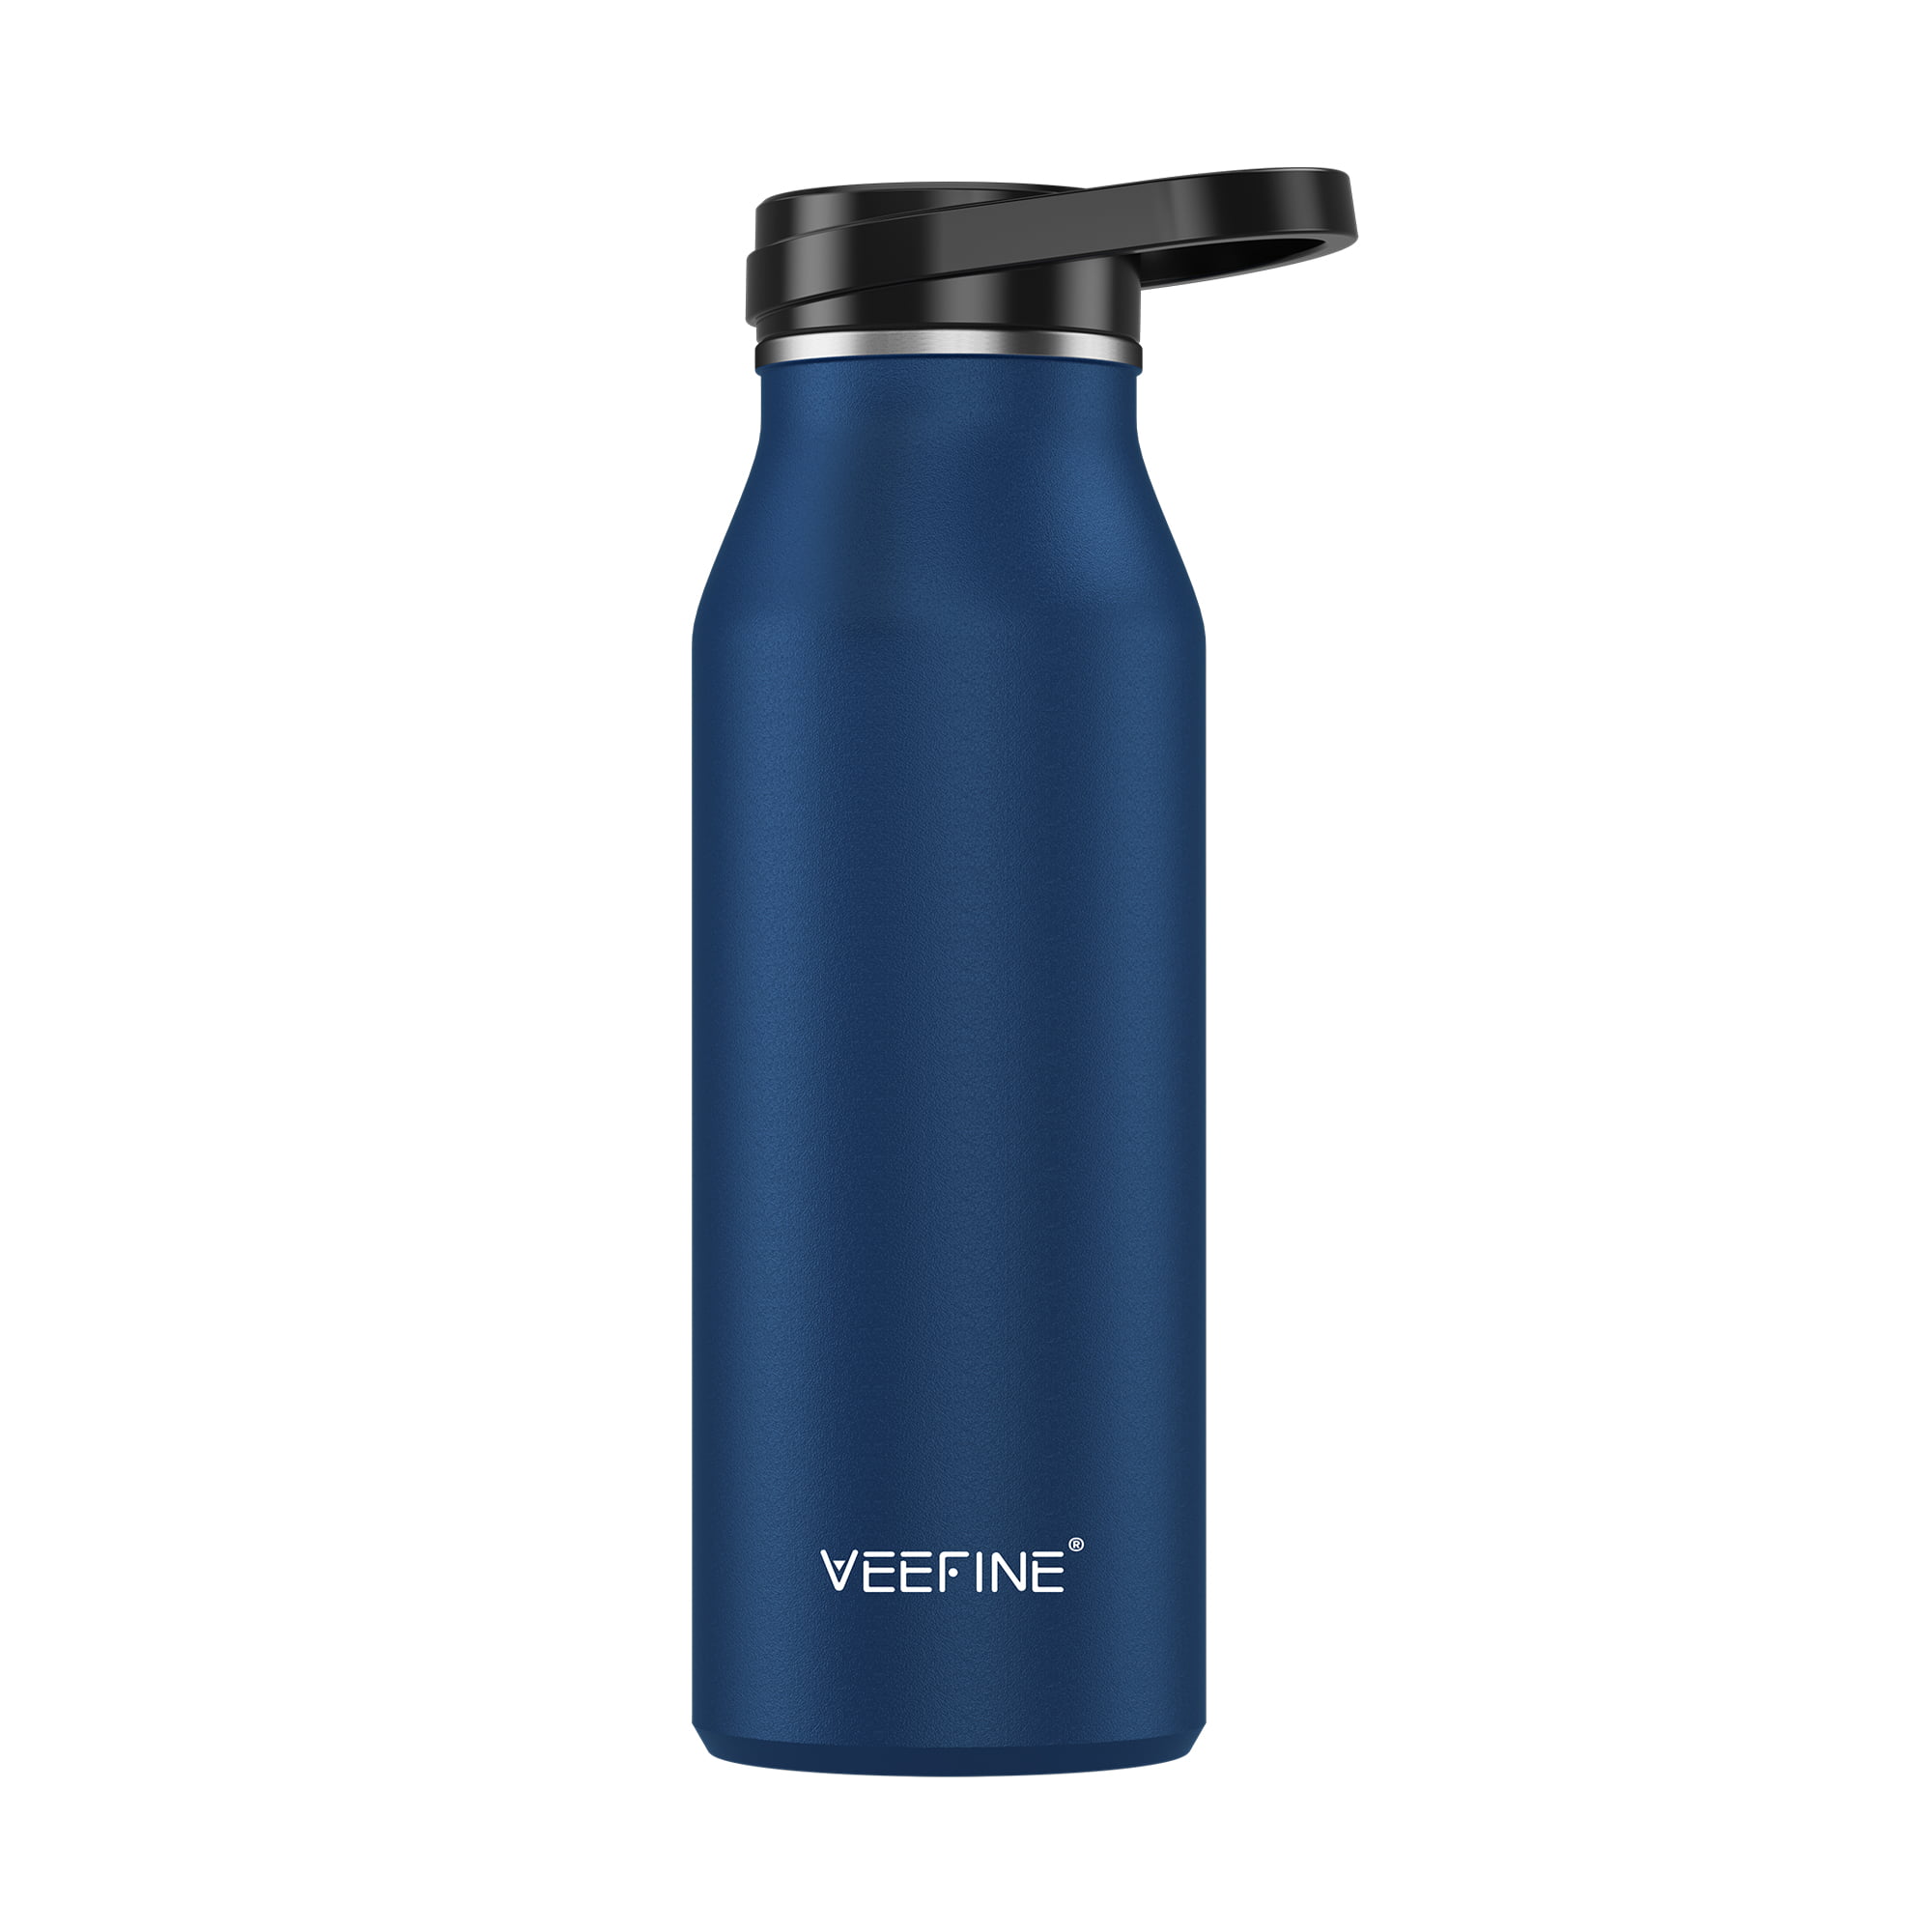 VeeFine Insulated Water Bottle BPA-Free Dishwasher Safe 20/32/40oz 100% Leak-Proof Keeps Cold and Hot Stainless Steel Water Bottle Wide Mouth Lid Eco-Friendly Thermos for Hiking Camping and Travel 